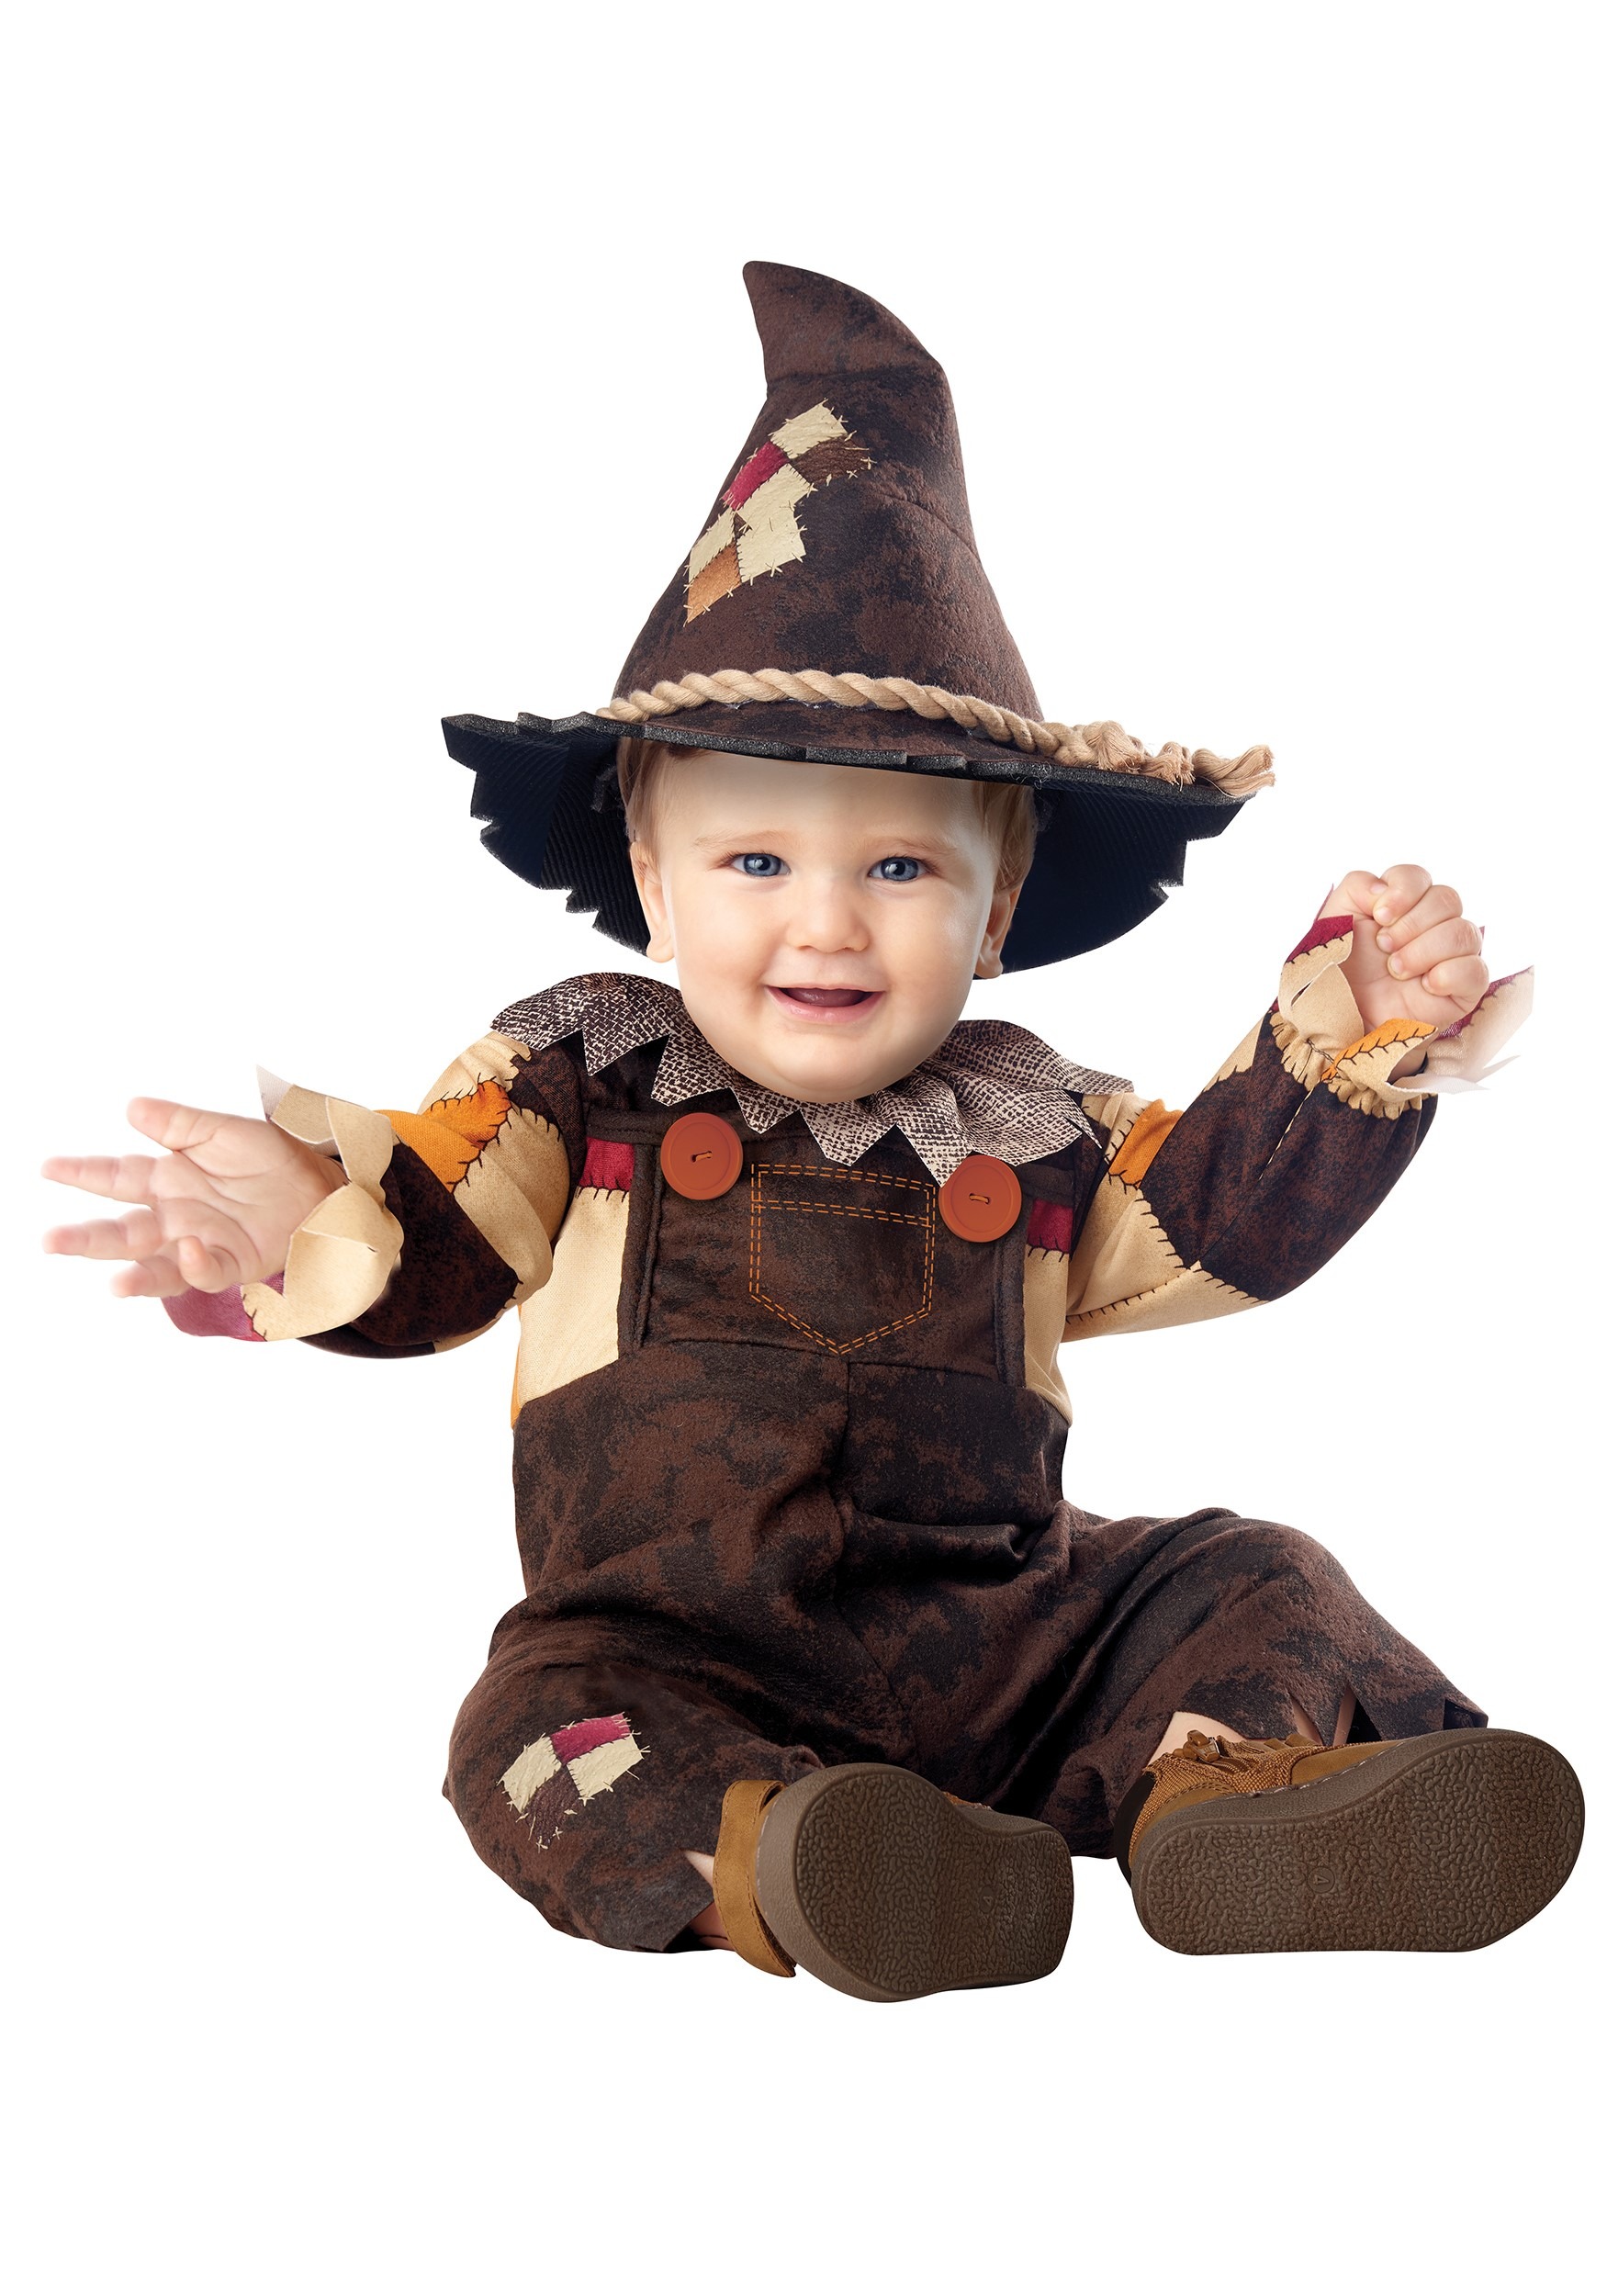 Photos - Fancy Dress California Costume Collection Happy Harvest Scarecrow Infant Costume Brown 